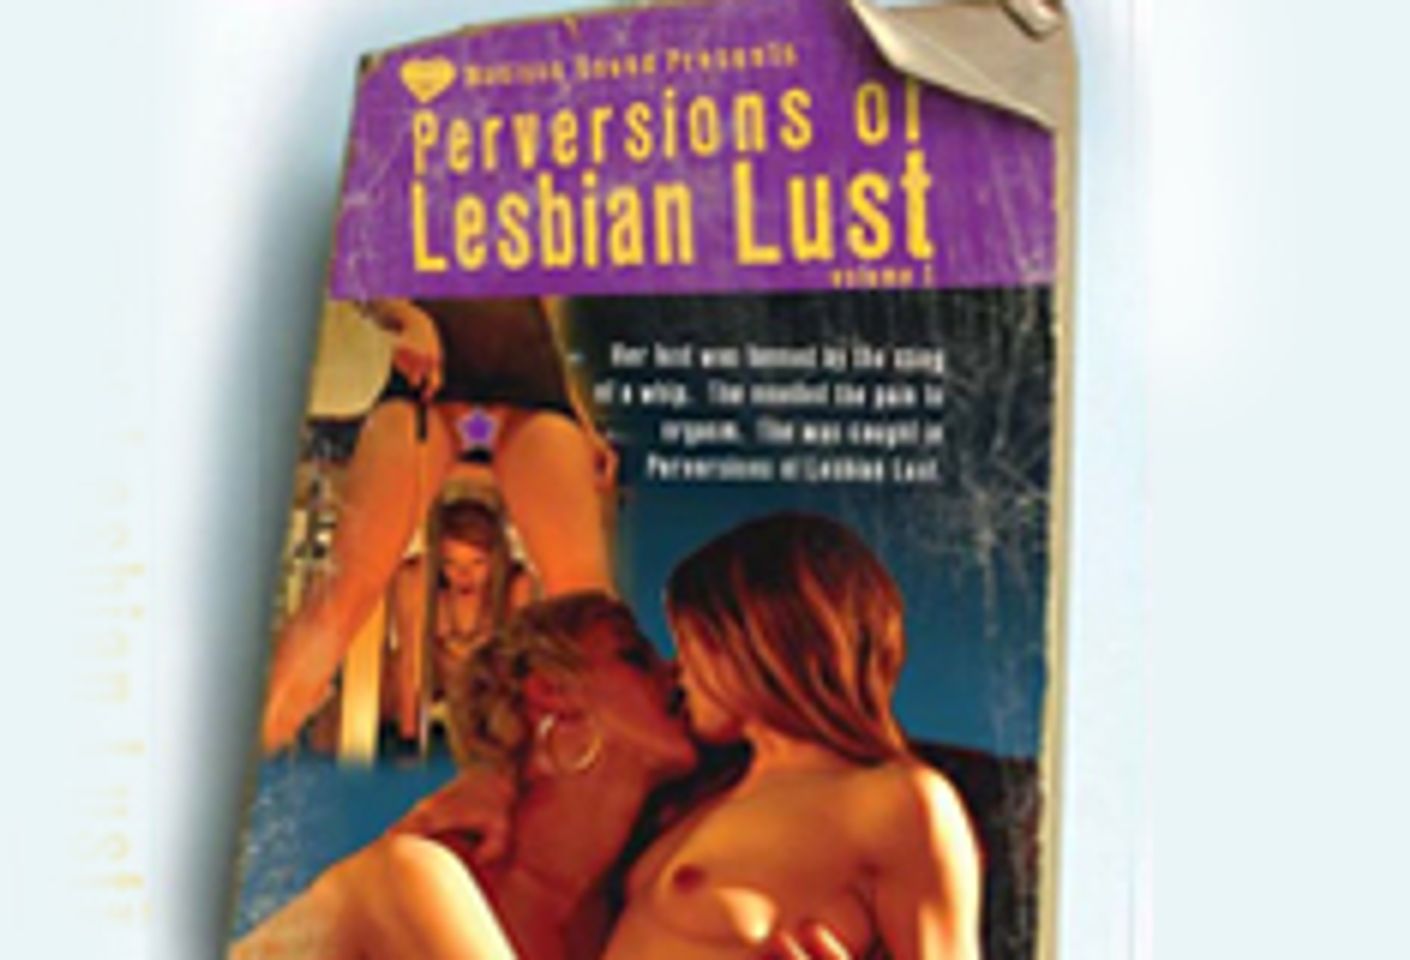 Madison Young Stars in 'Perversions of Lesbian Lust'